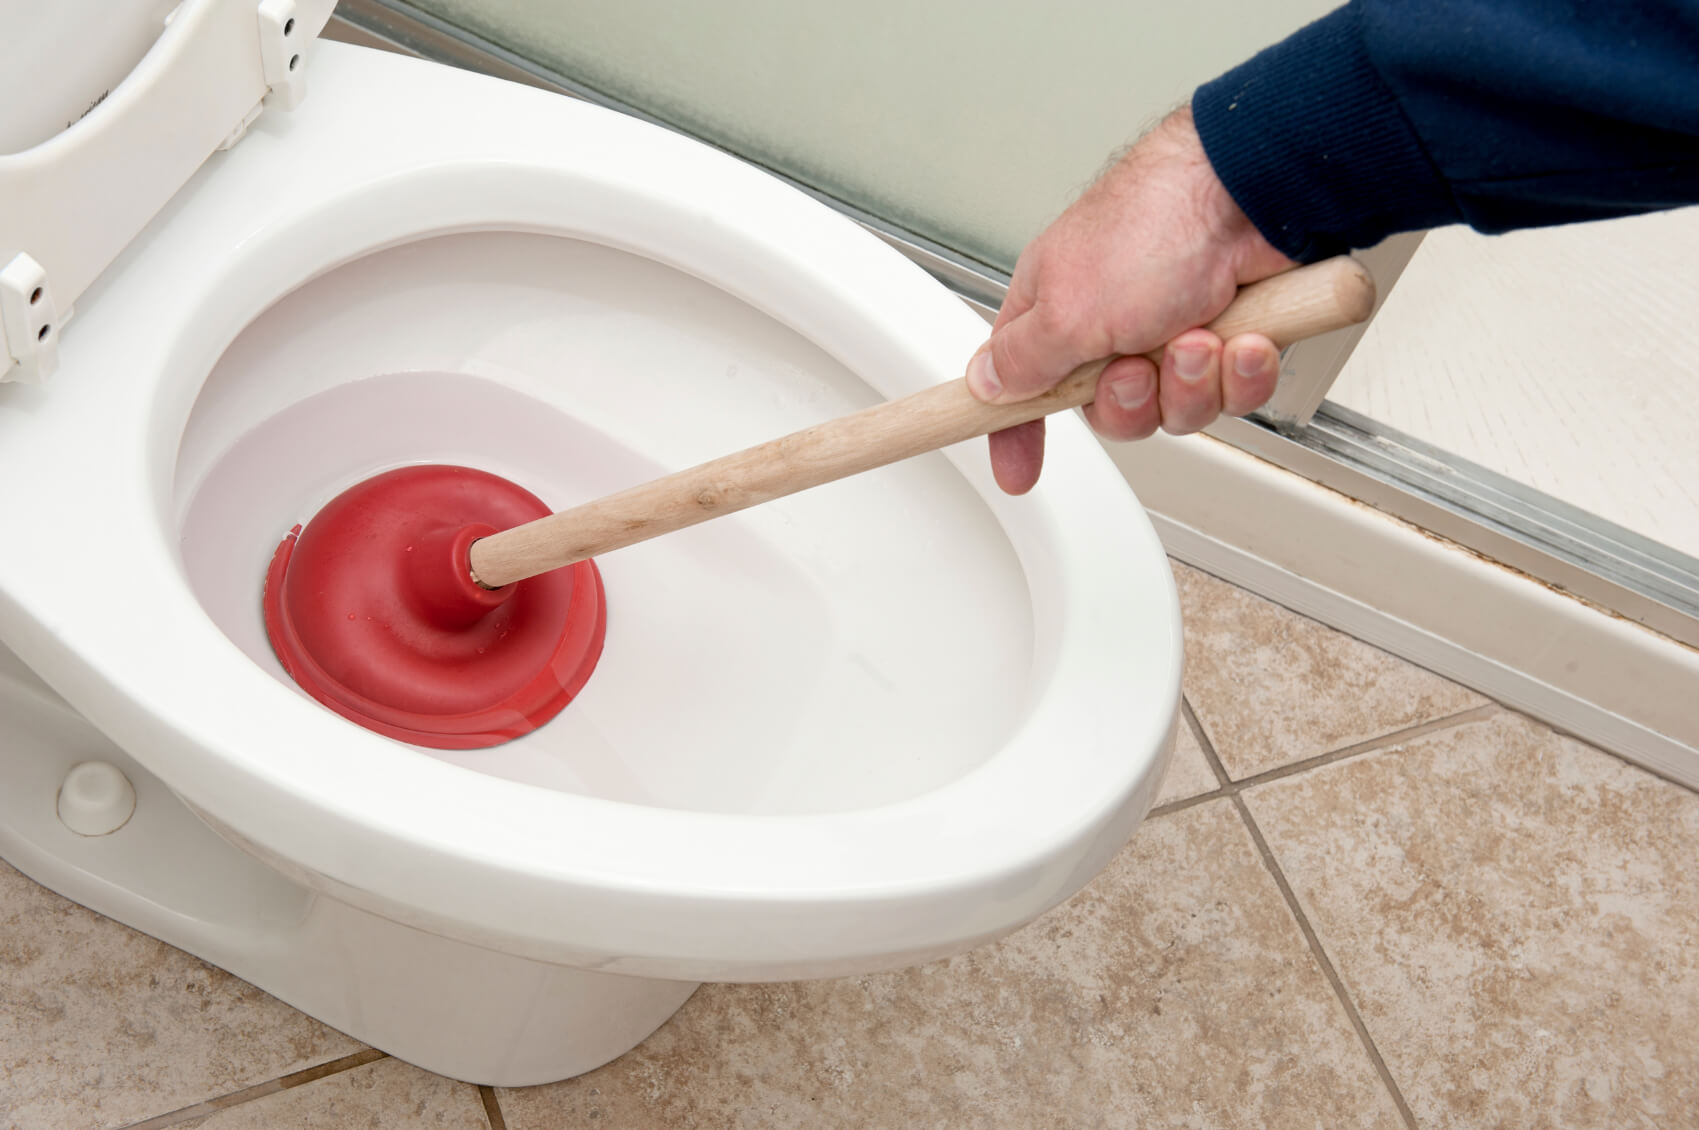 Learn how to fix a Clogged Toilet with Mathew's Plumbing